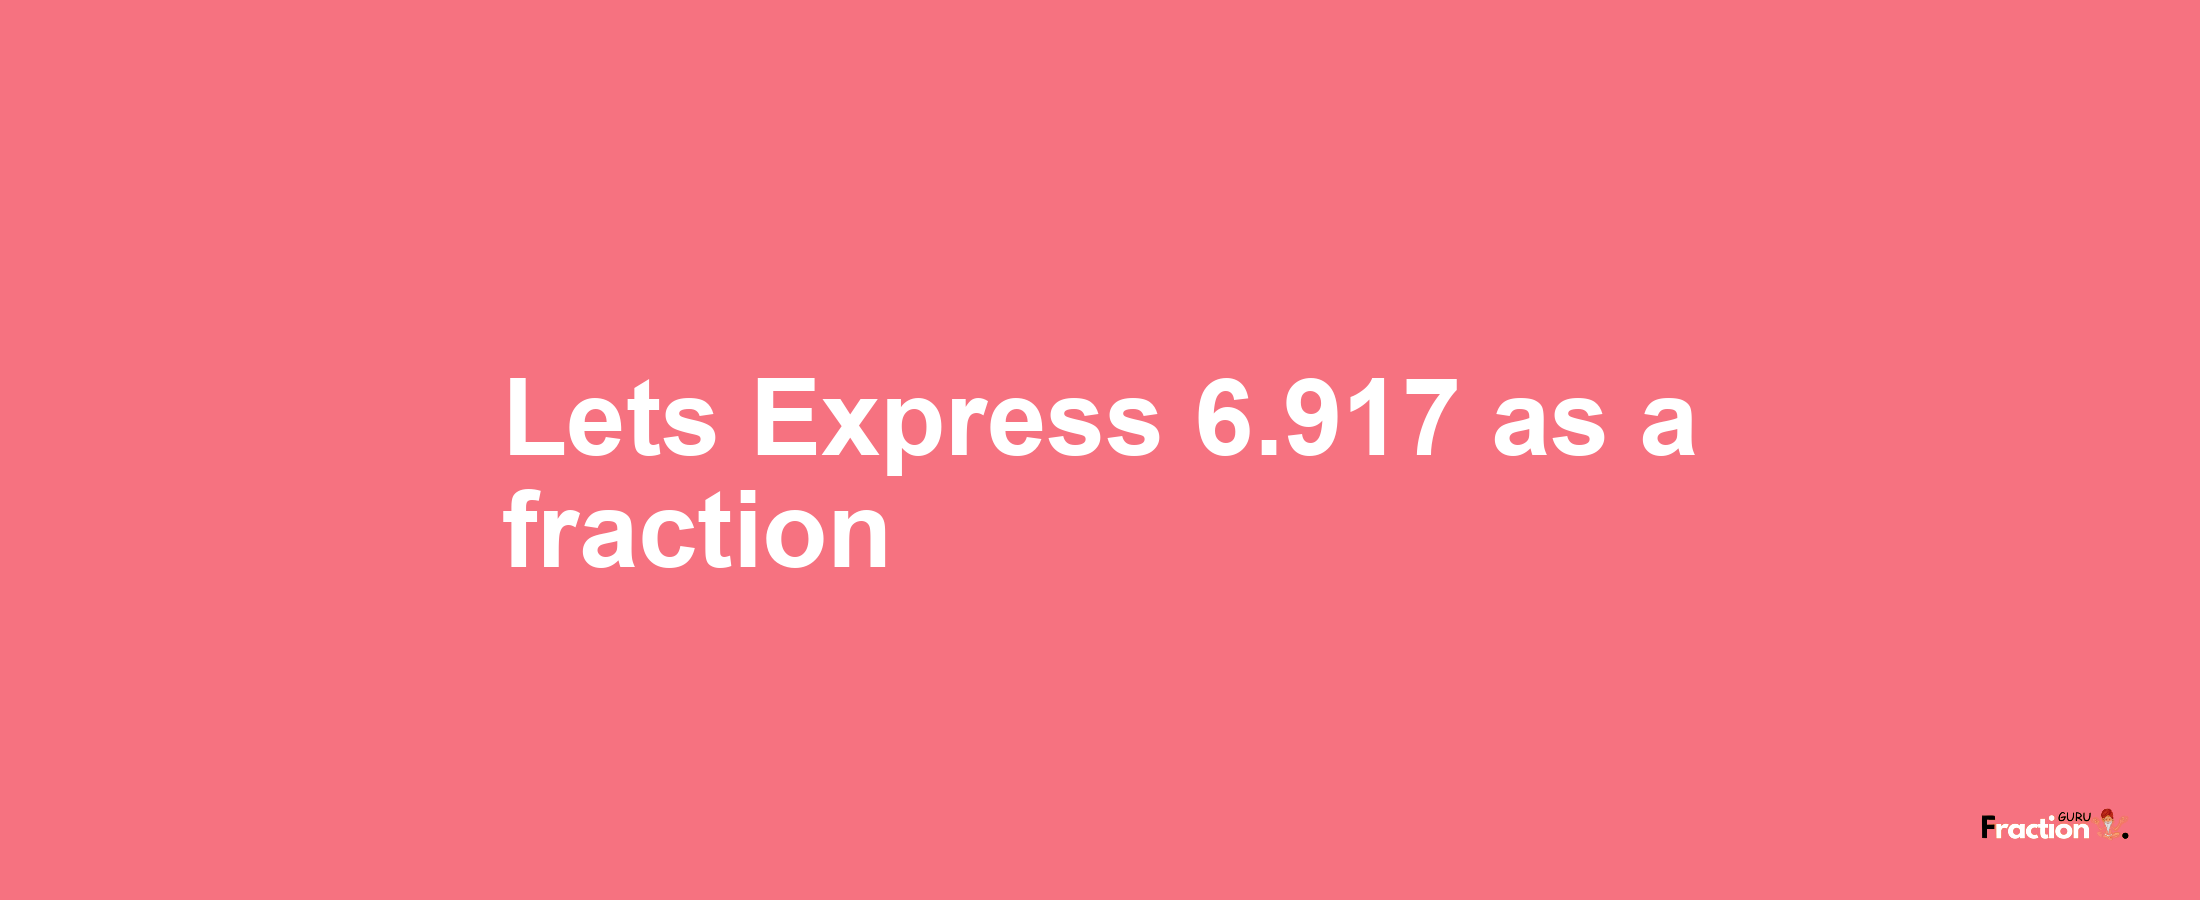 Lets Express 6.917 as afraction